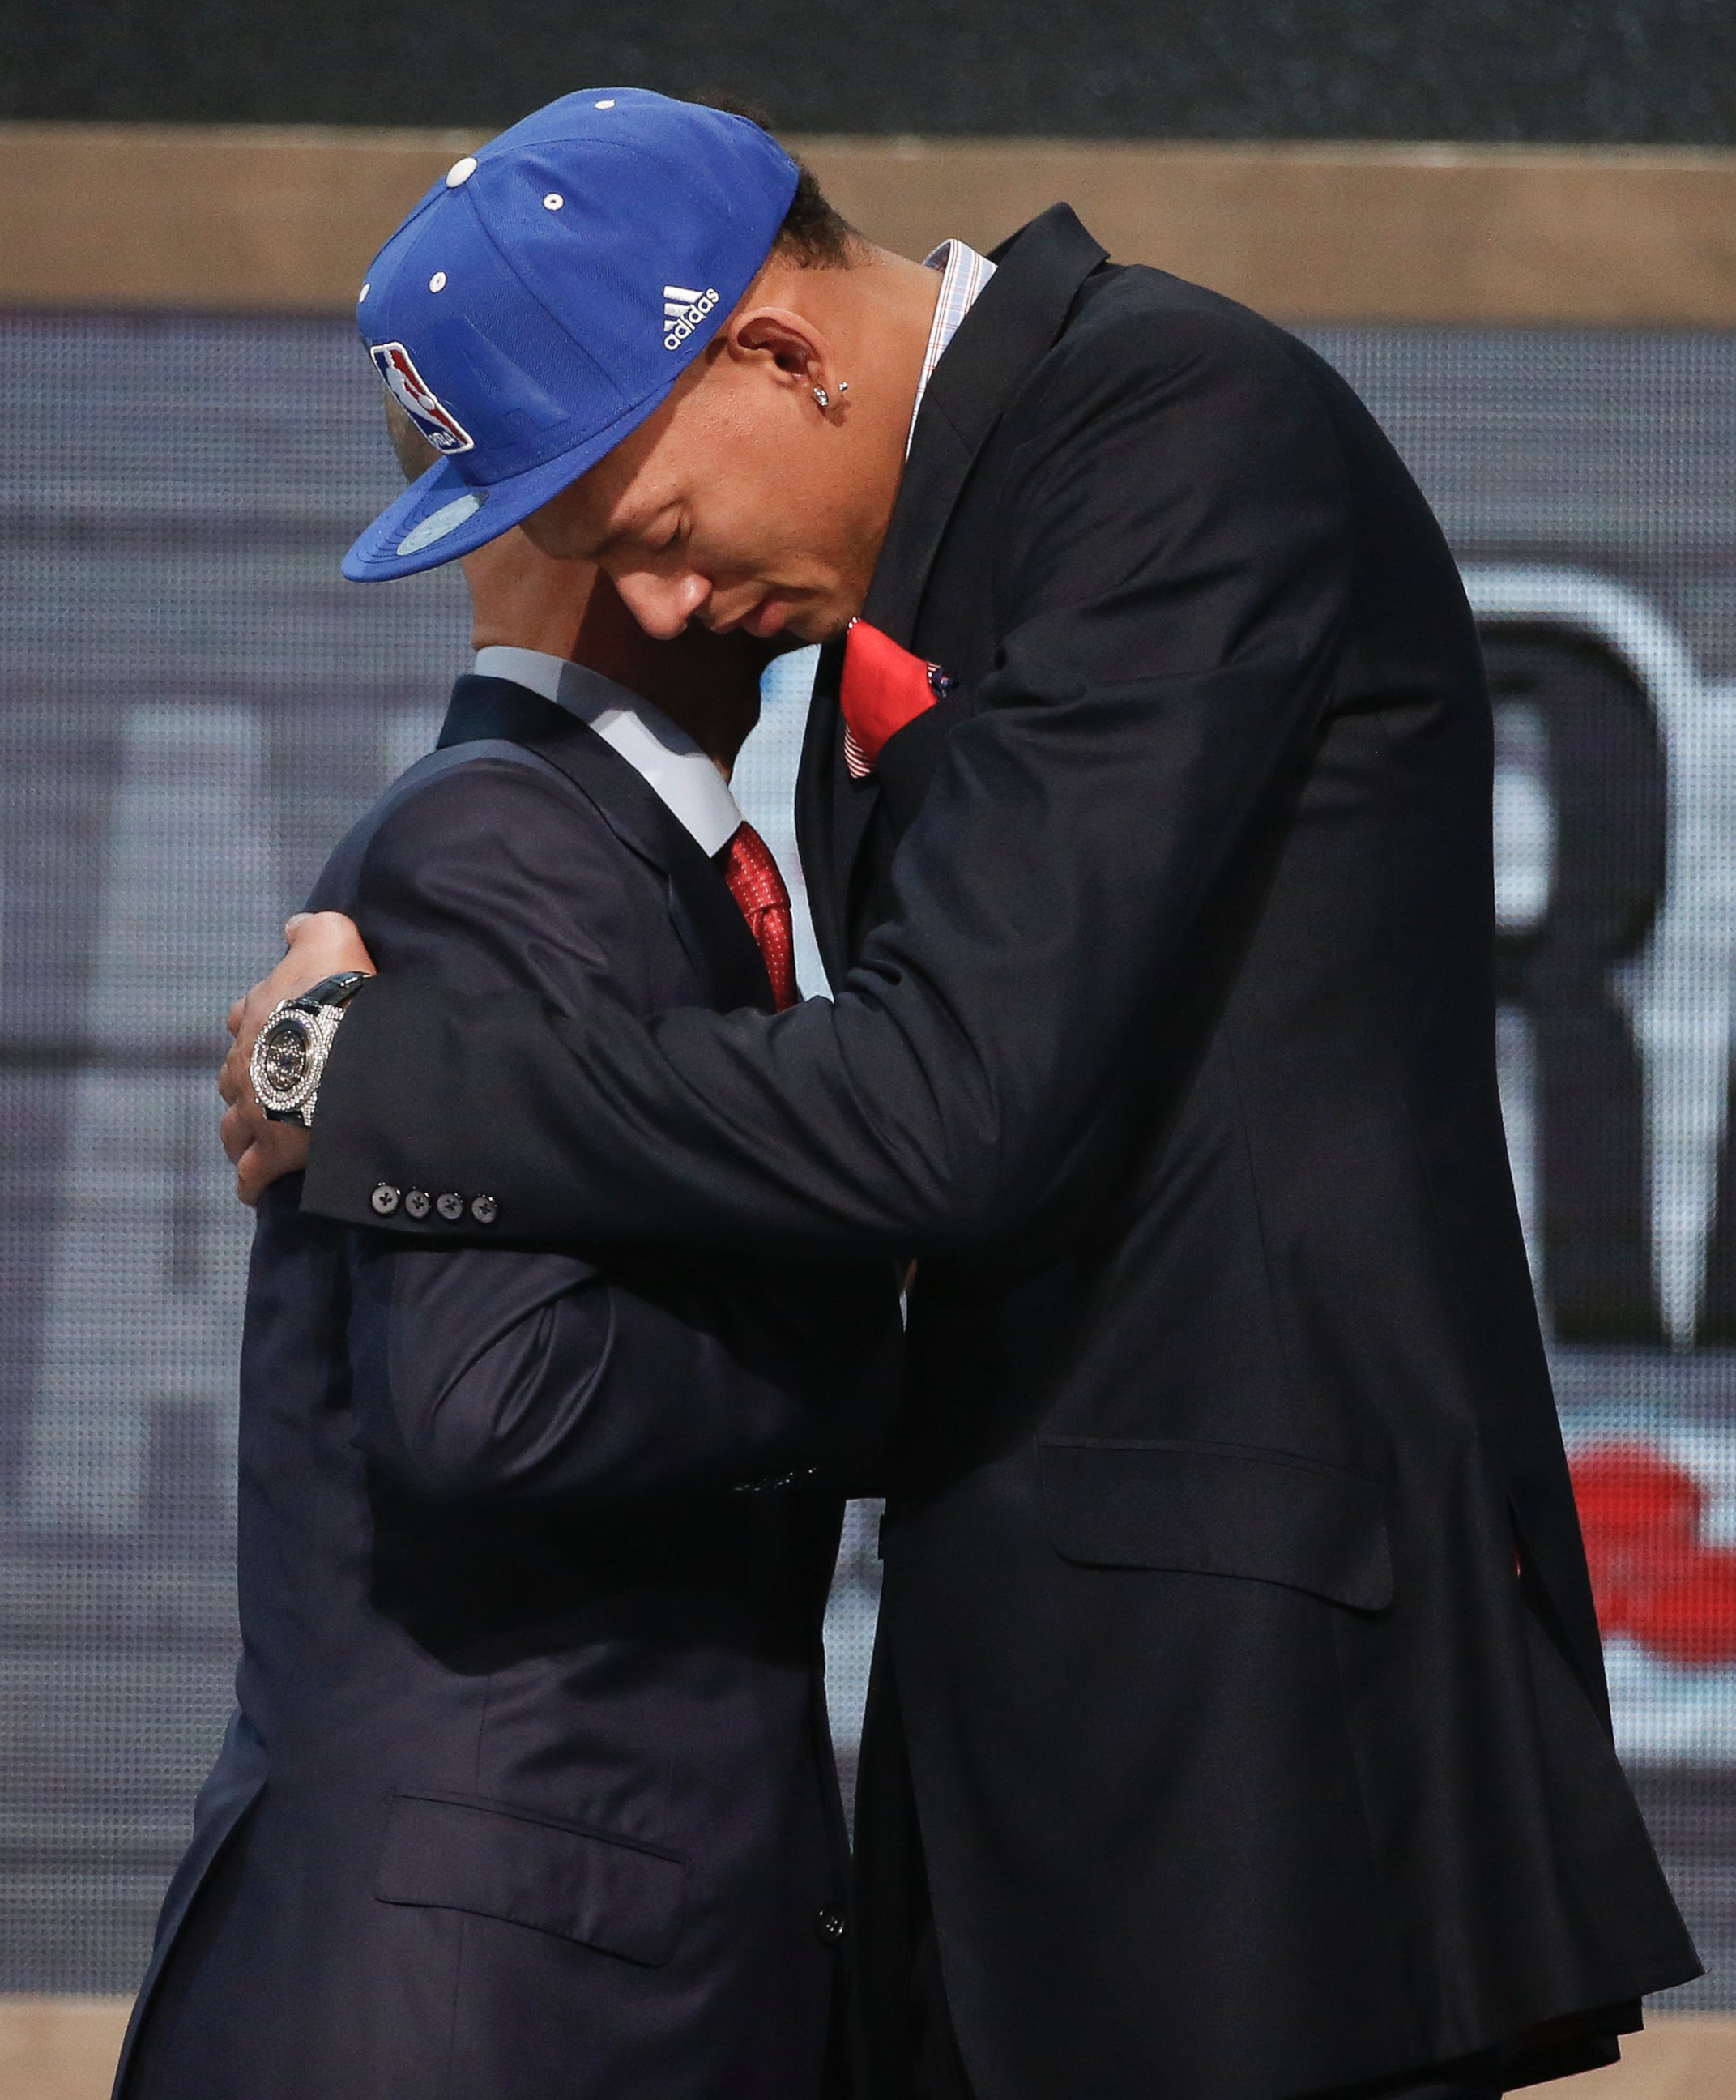 PHOTO: Baylor center Isaiah Austin, right, hugs NBA Commissioner Adam Silver after being granted a ceremonial first round pick during the 2014 NBA draft, June 26, 2014, in New York.